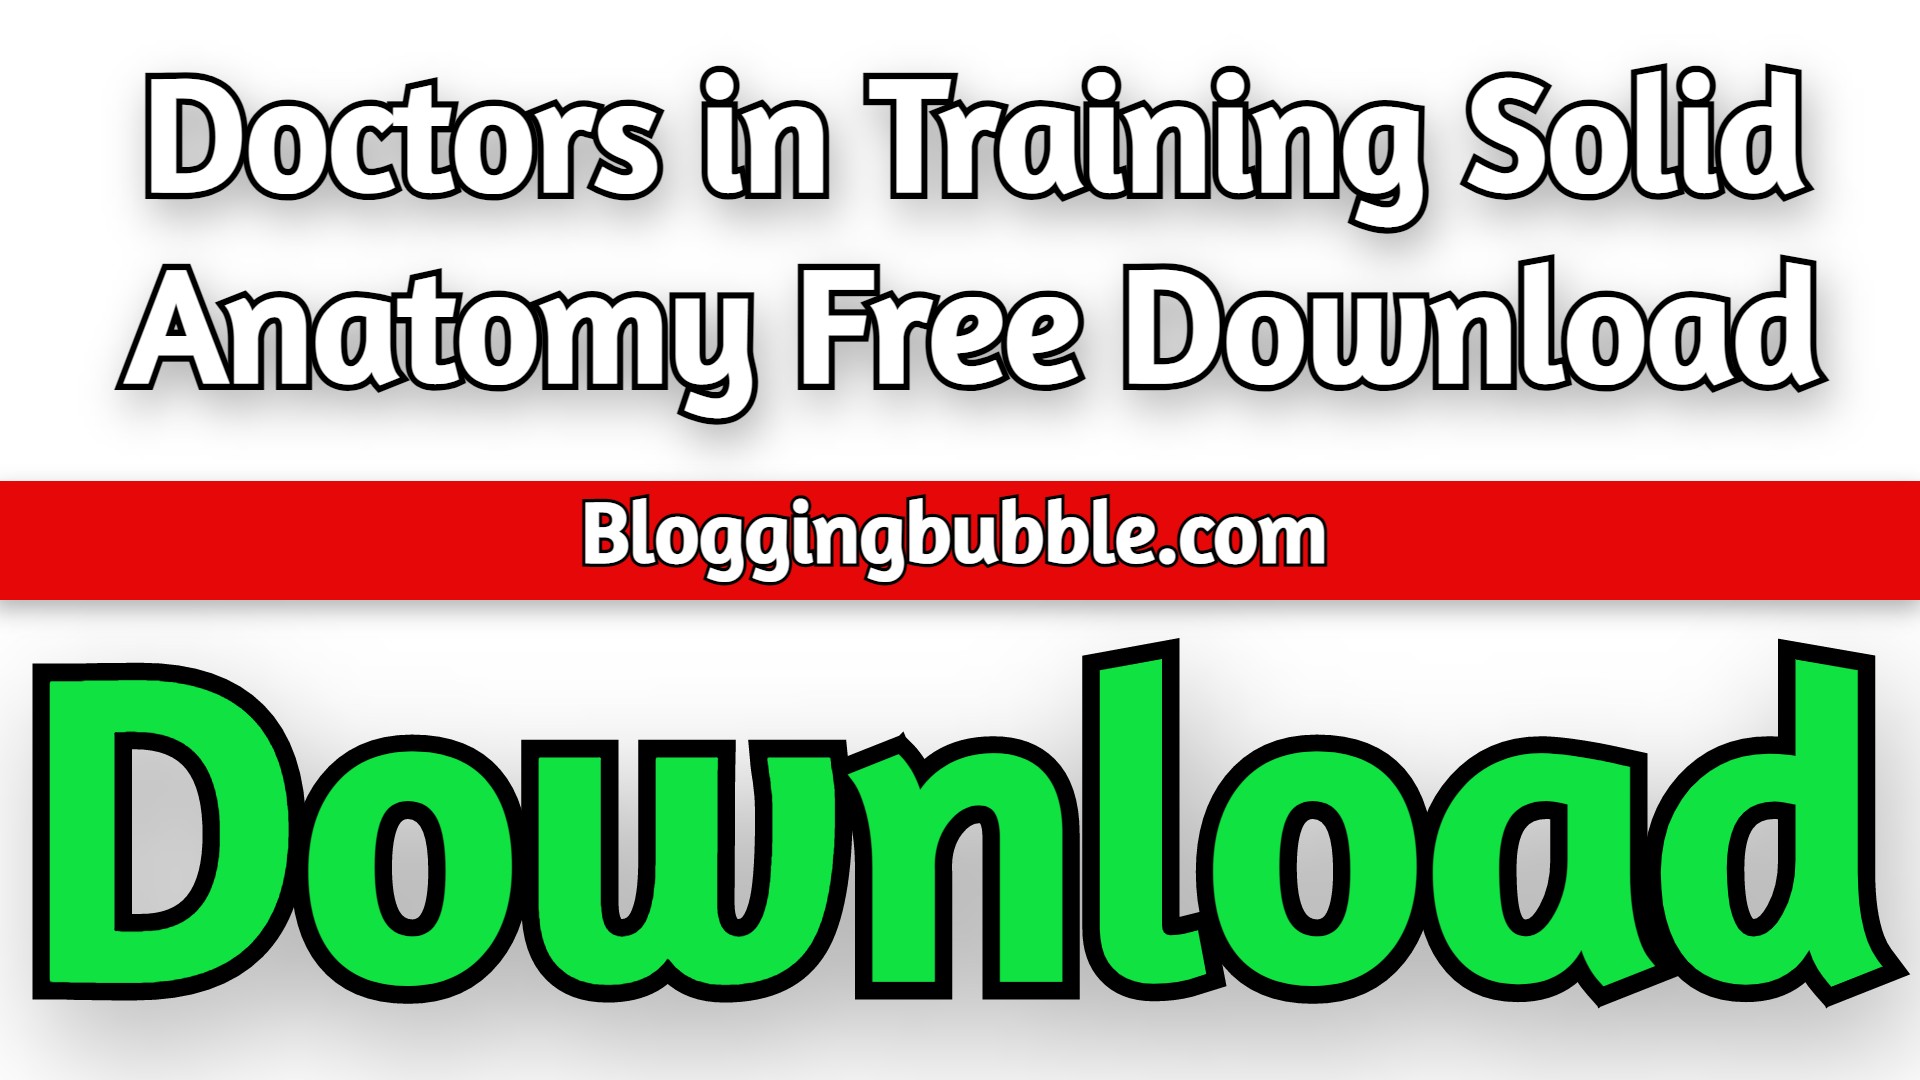 Doctors in Training Solid Anatomy 2022 Free Download